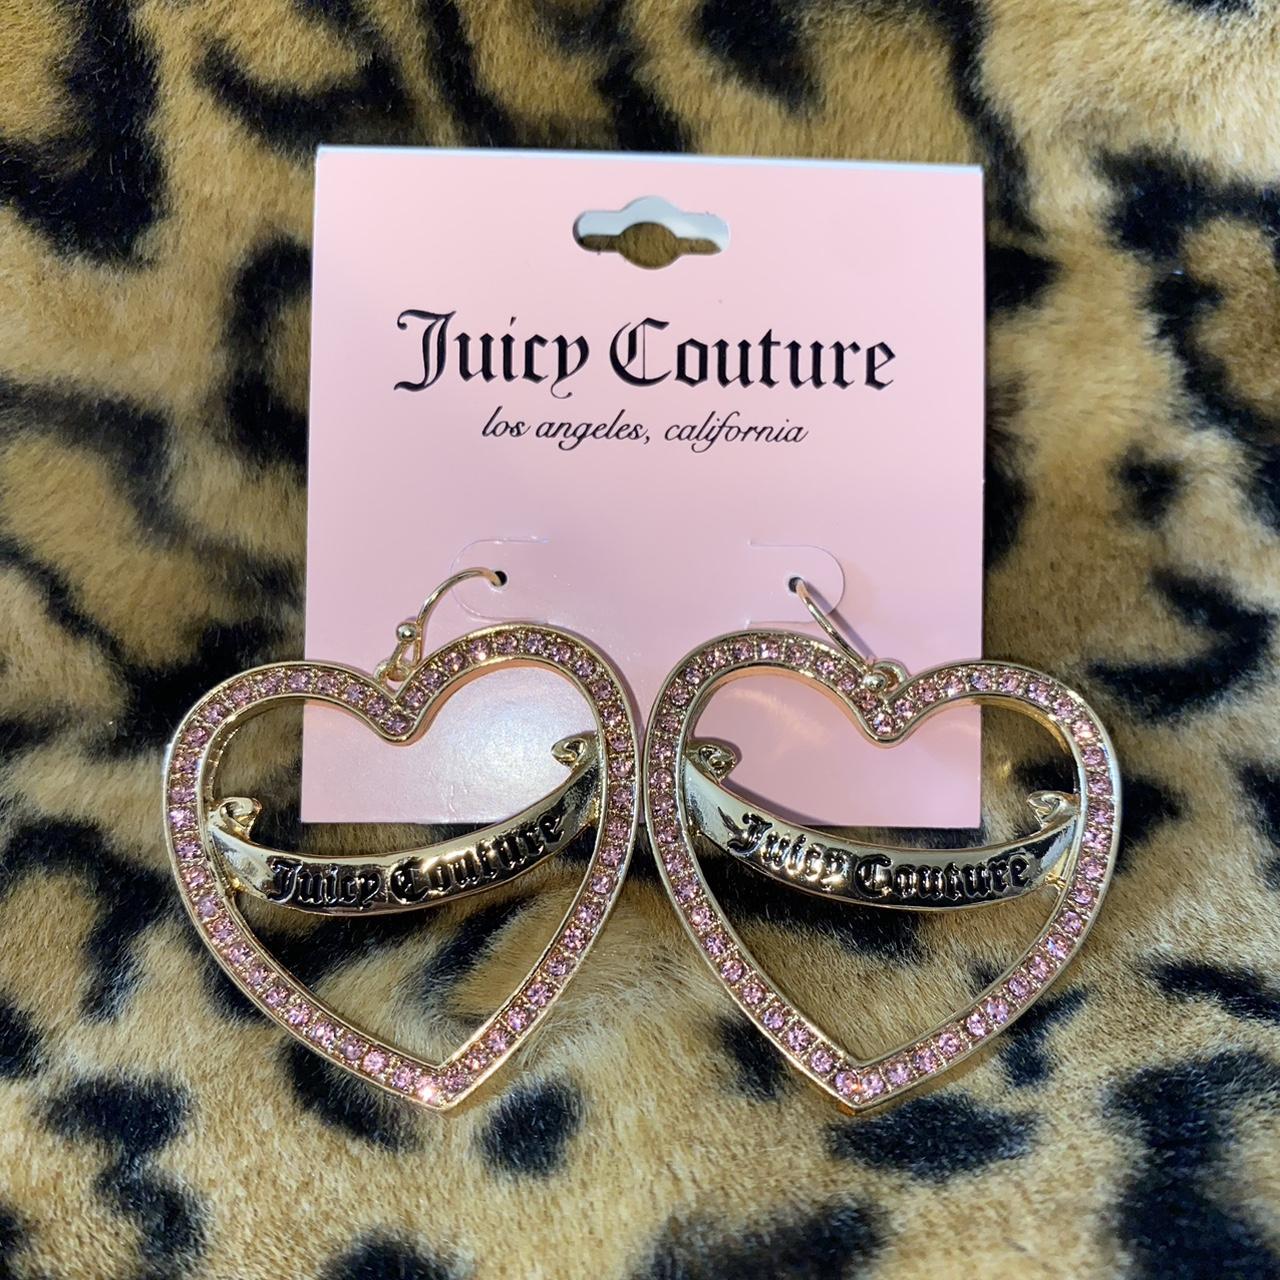 Juicy Couture Women's Pink and Gold Jewellery